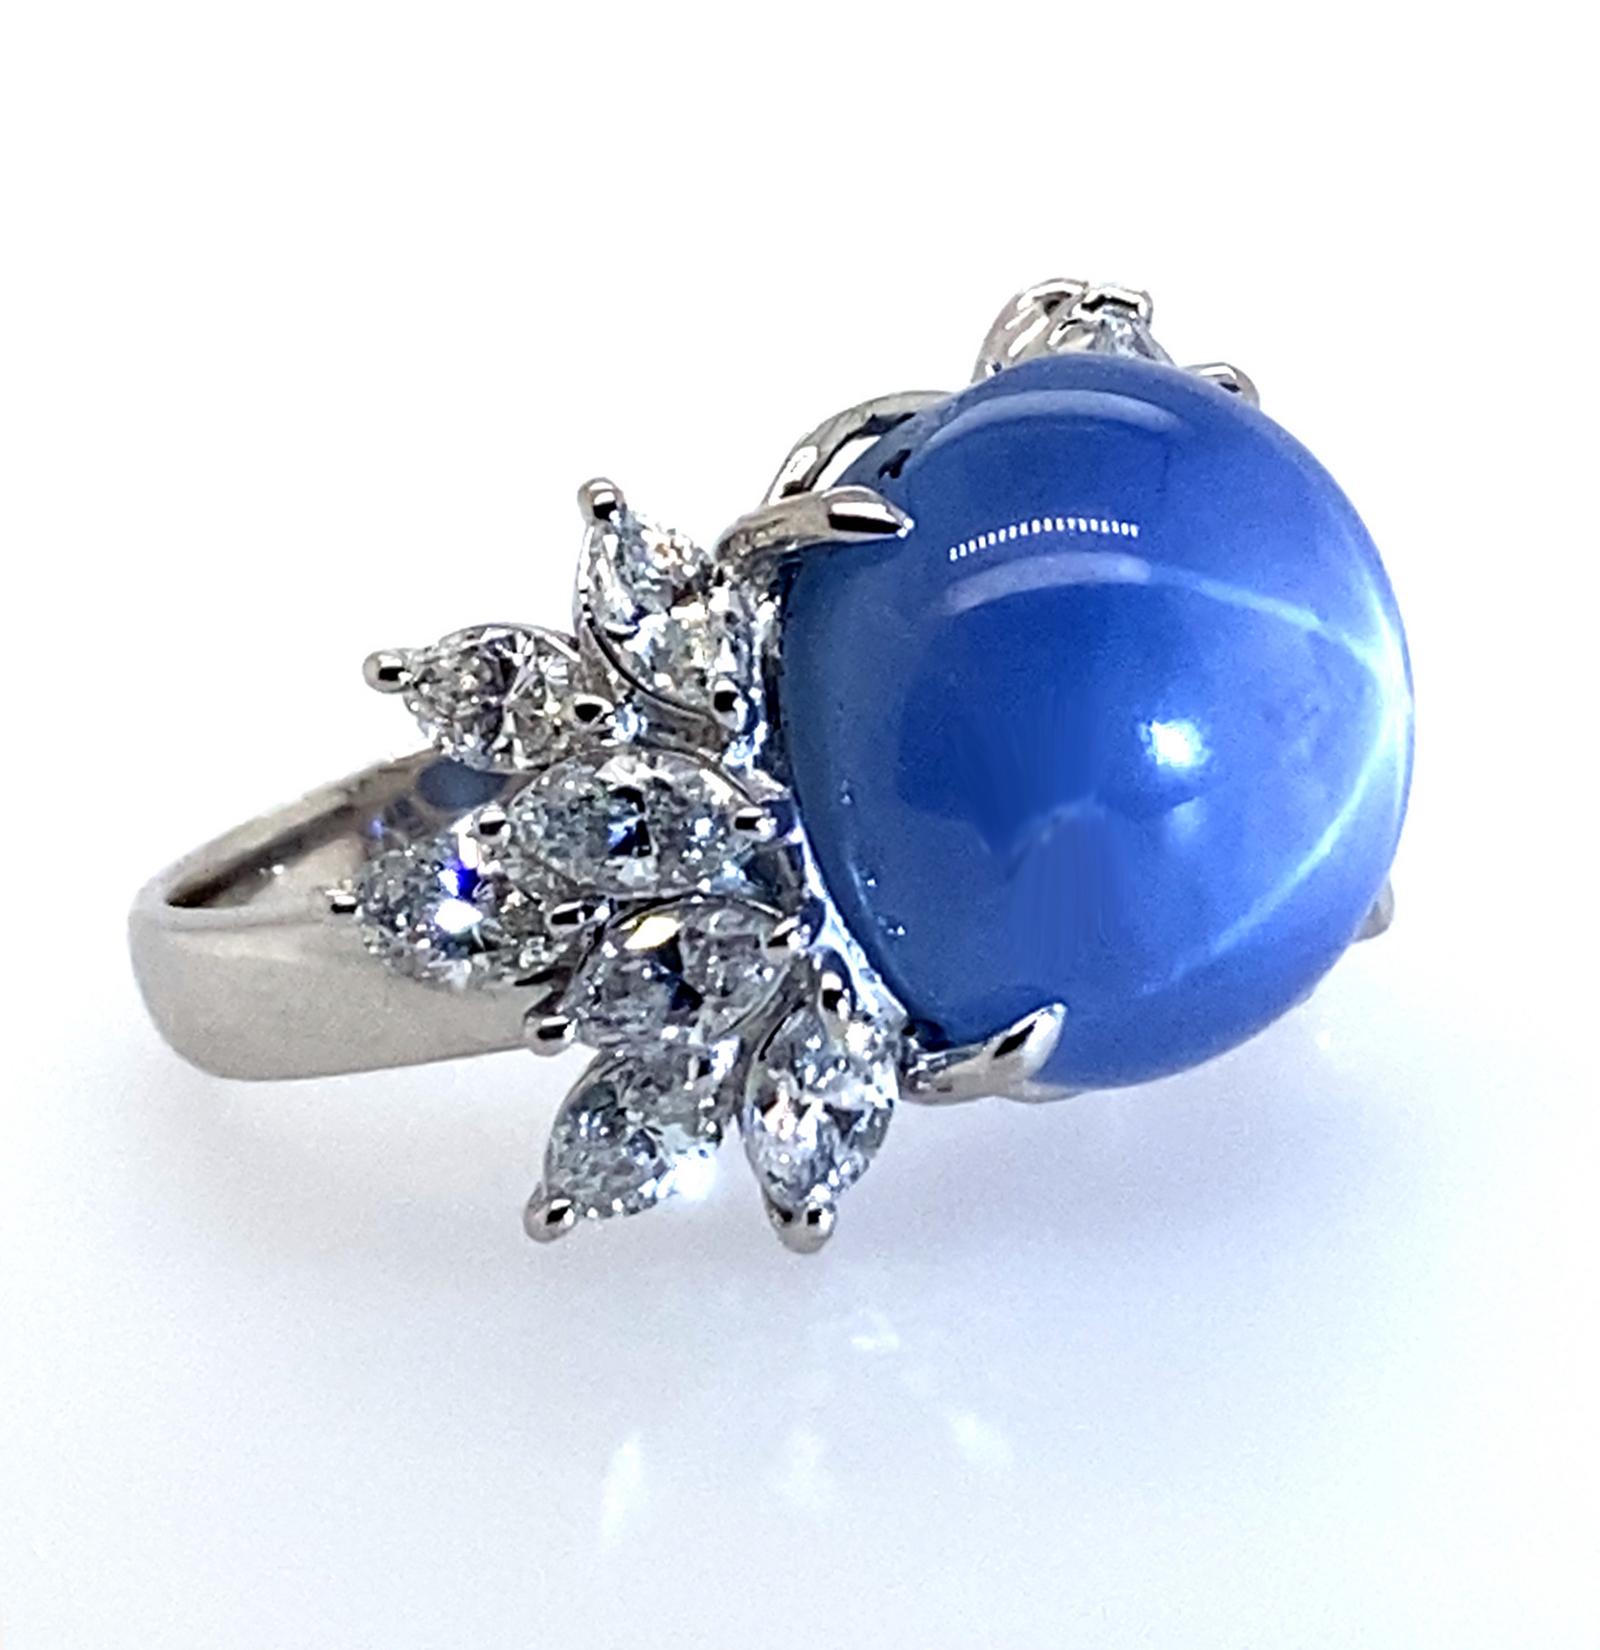 Platinum Ring with 21.83 carat Sky Blue Star Sapphire and 14 marquis cut diamonds weighing 2.03 carats. Complimentary expert ring sizing included with your purchase.